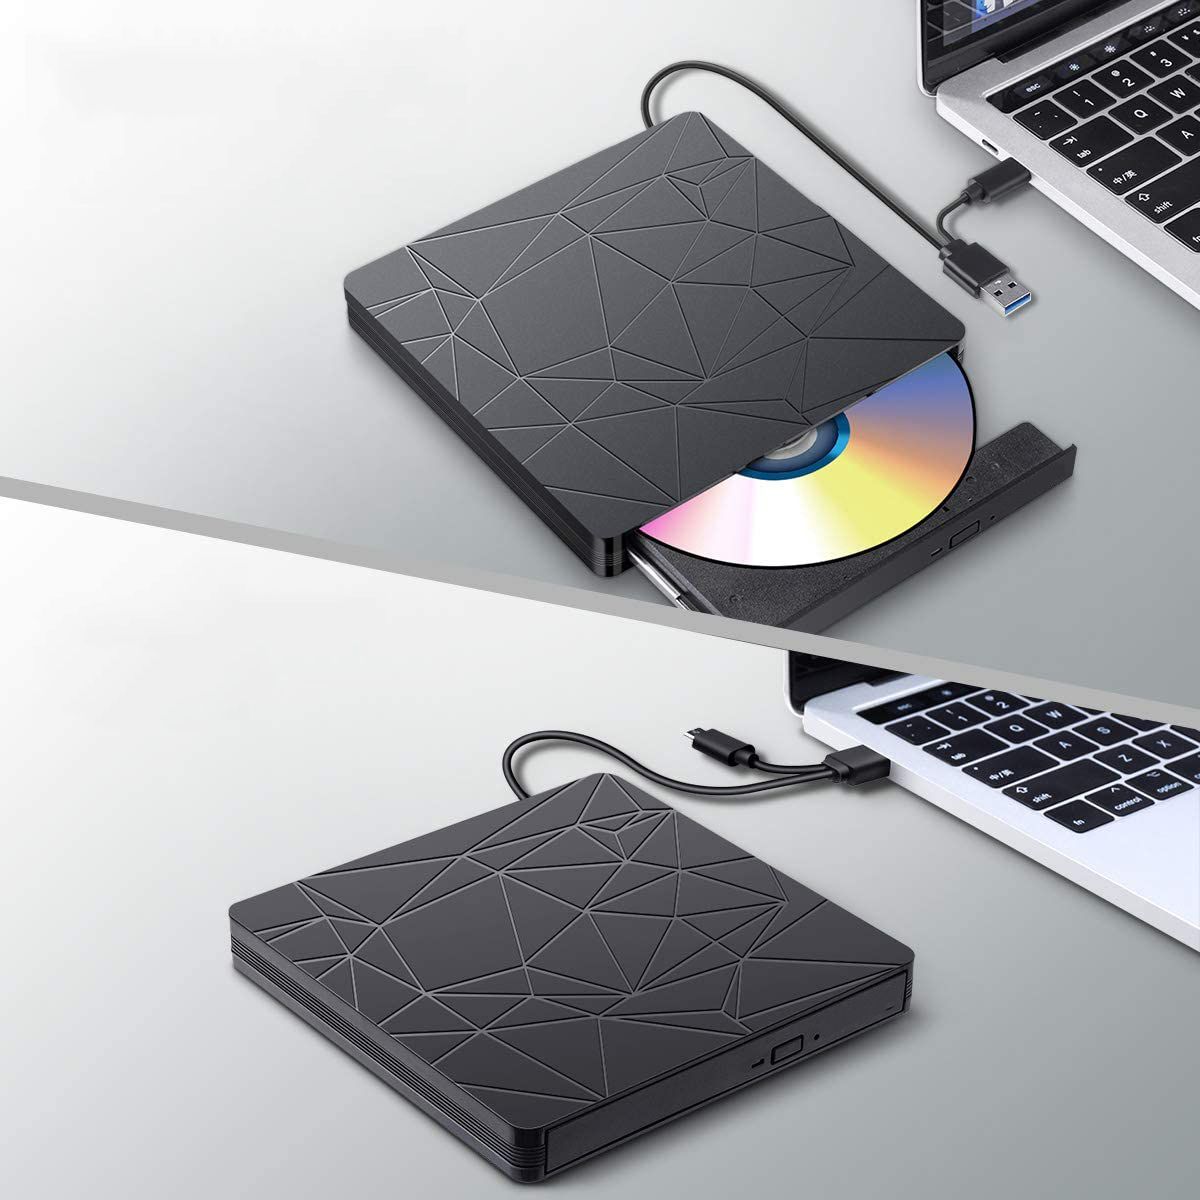 Type-CUSB30-Optical-Drives-Black-Spider-Starry-Sky-Texture-Support-WIN98XPWIN7WIN8WIN10-VISTA-Mac-86-1725942